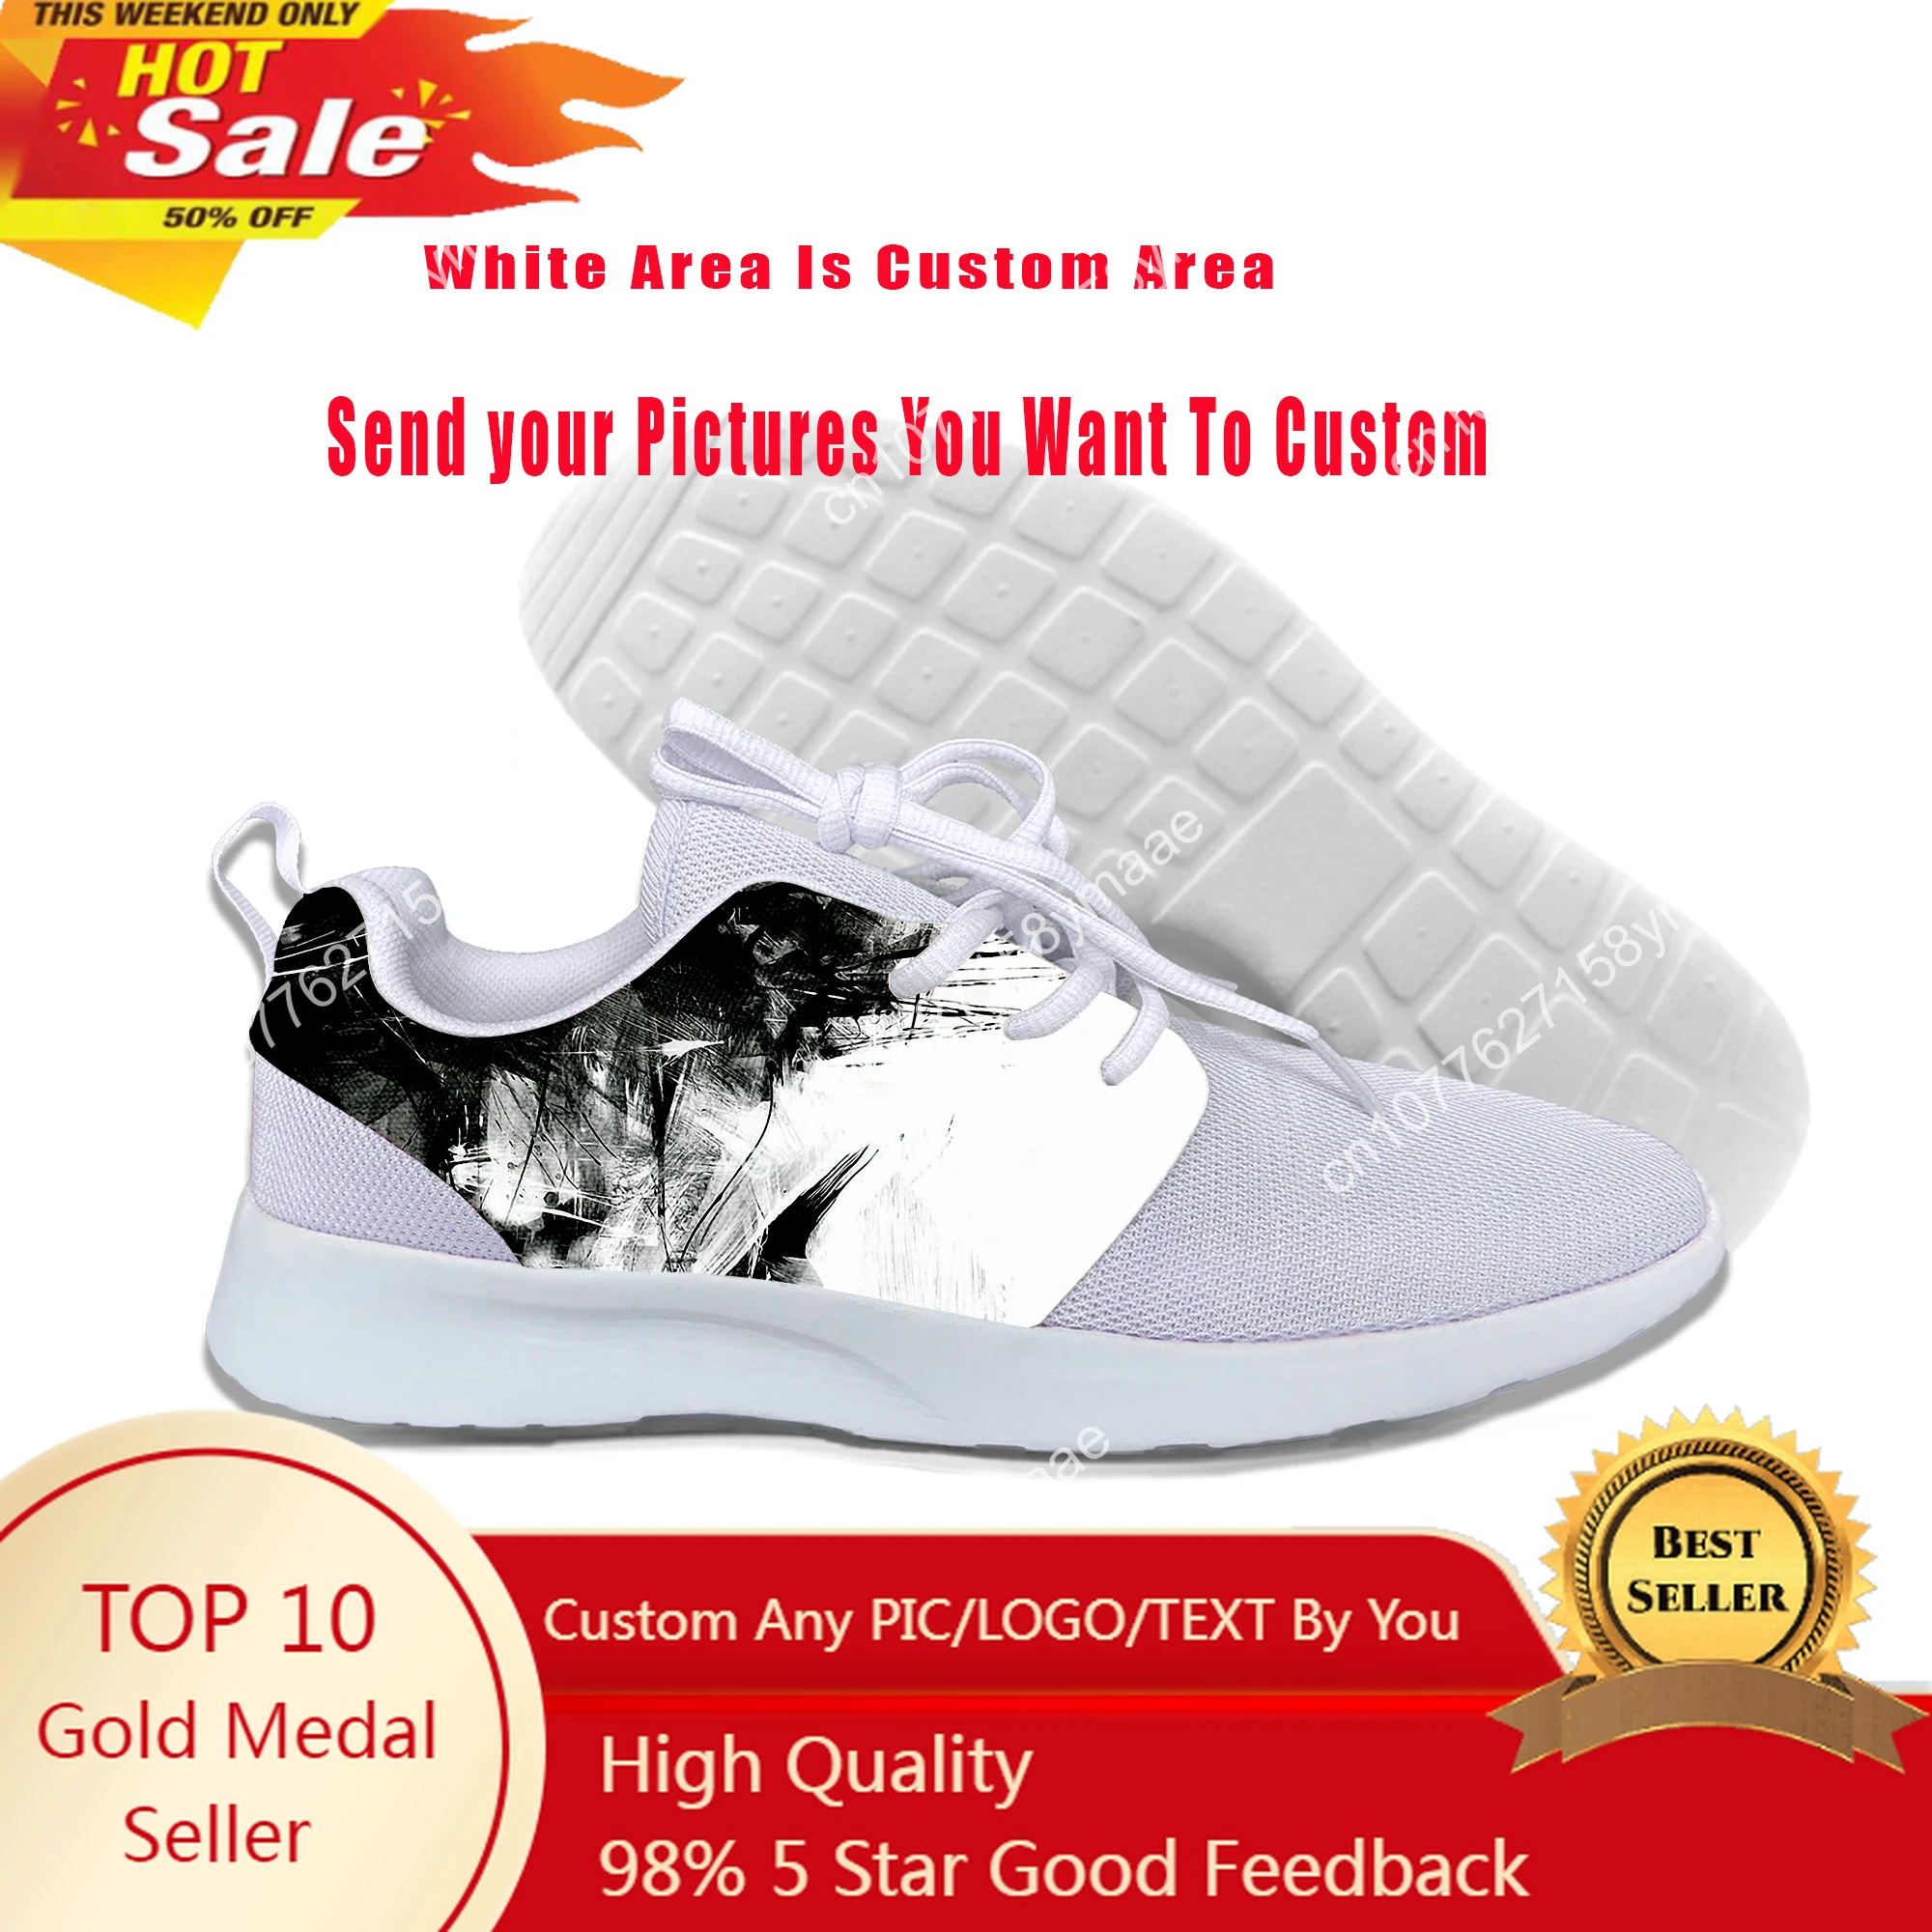 Hot Cool Splashed Paint Casual Shoes Summer Shoes Men Short Printed 3D Sneakers Lightweight Running Shoes Classic Sports Shoes men running shoes summer mesh breathable sneakers lightweight man sports shoes light walking jogging shoes 350 boost disruptor